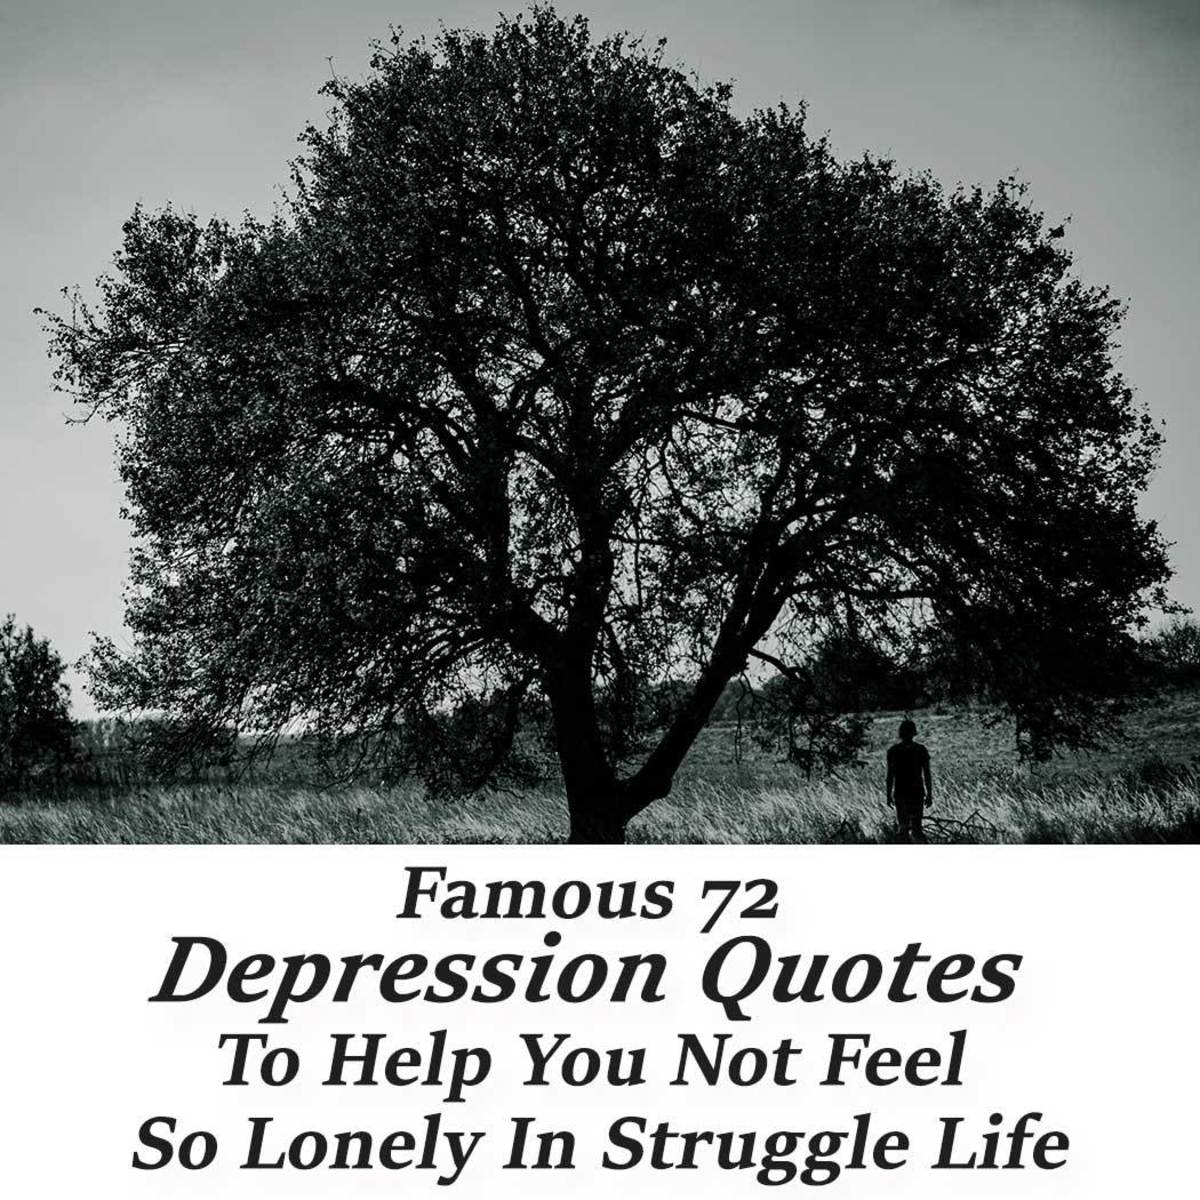 Famous 72 Depression Quotes To Help You Not Feel So Lonely In Struggle Life